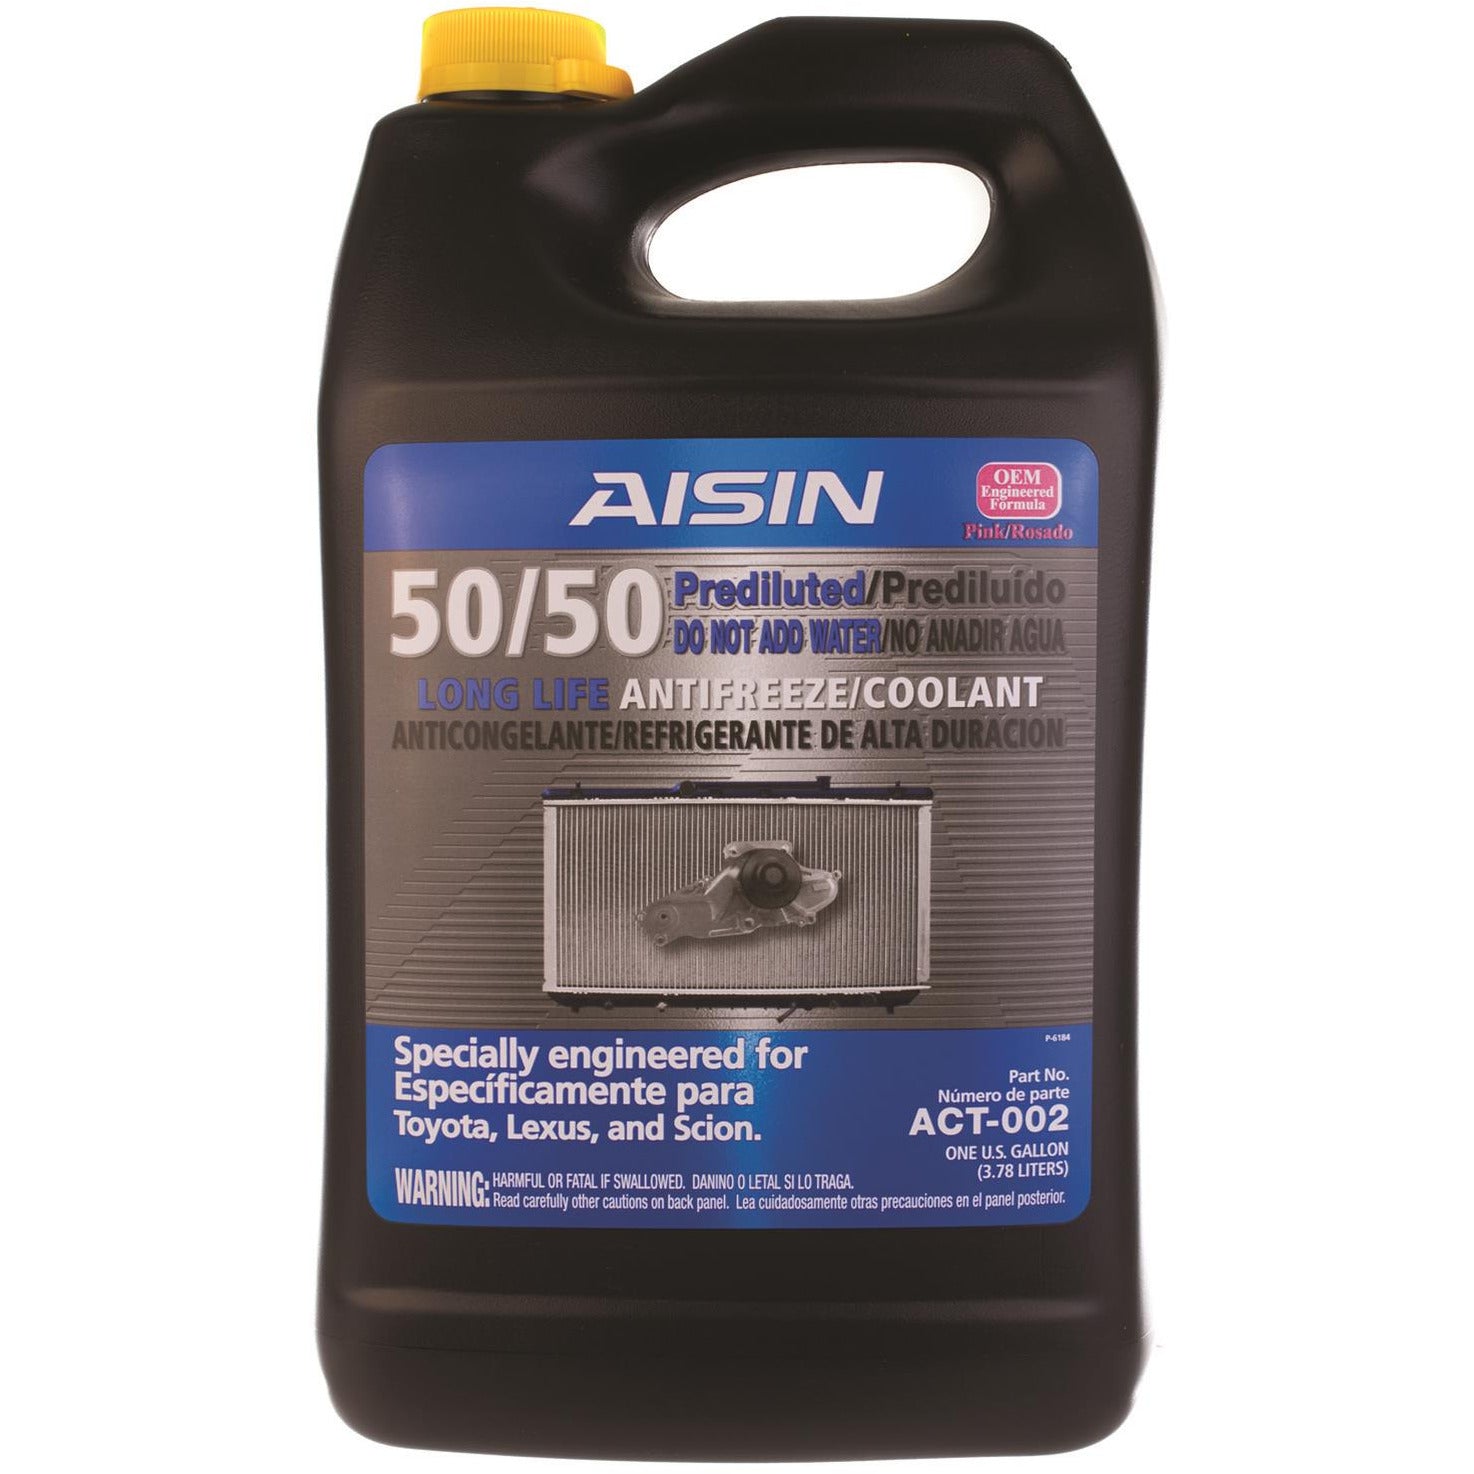 XAP ACT-002 Aisin 50/50 Pre-Diluted Super Long-Life Antifreeze/Coolant (Pink)